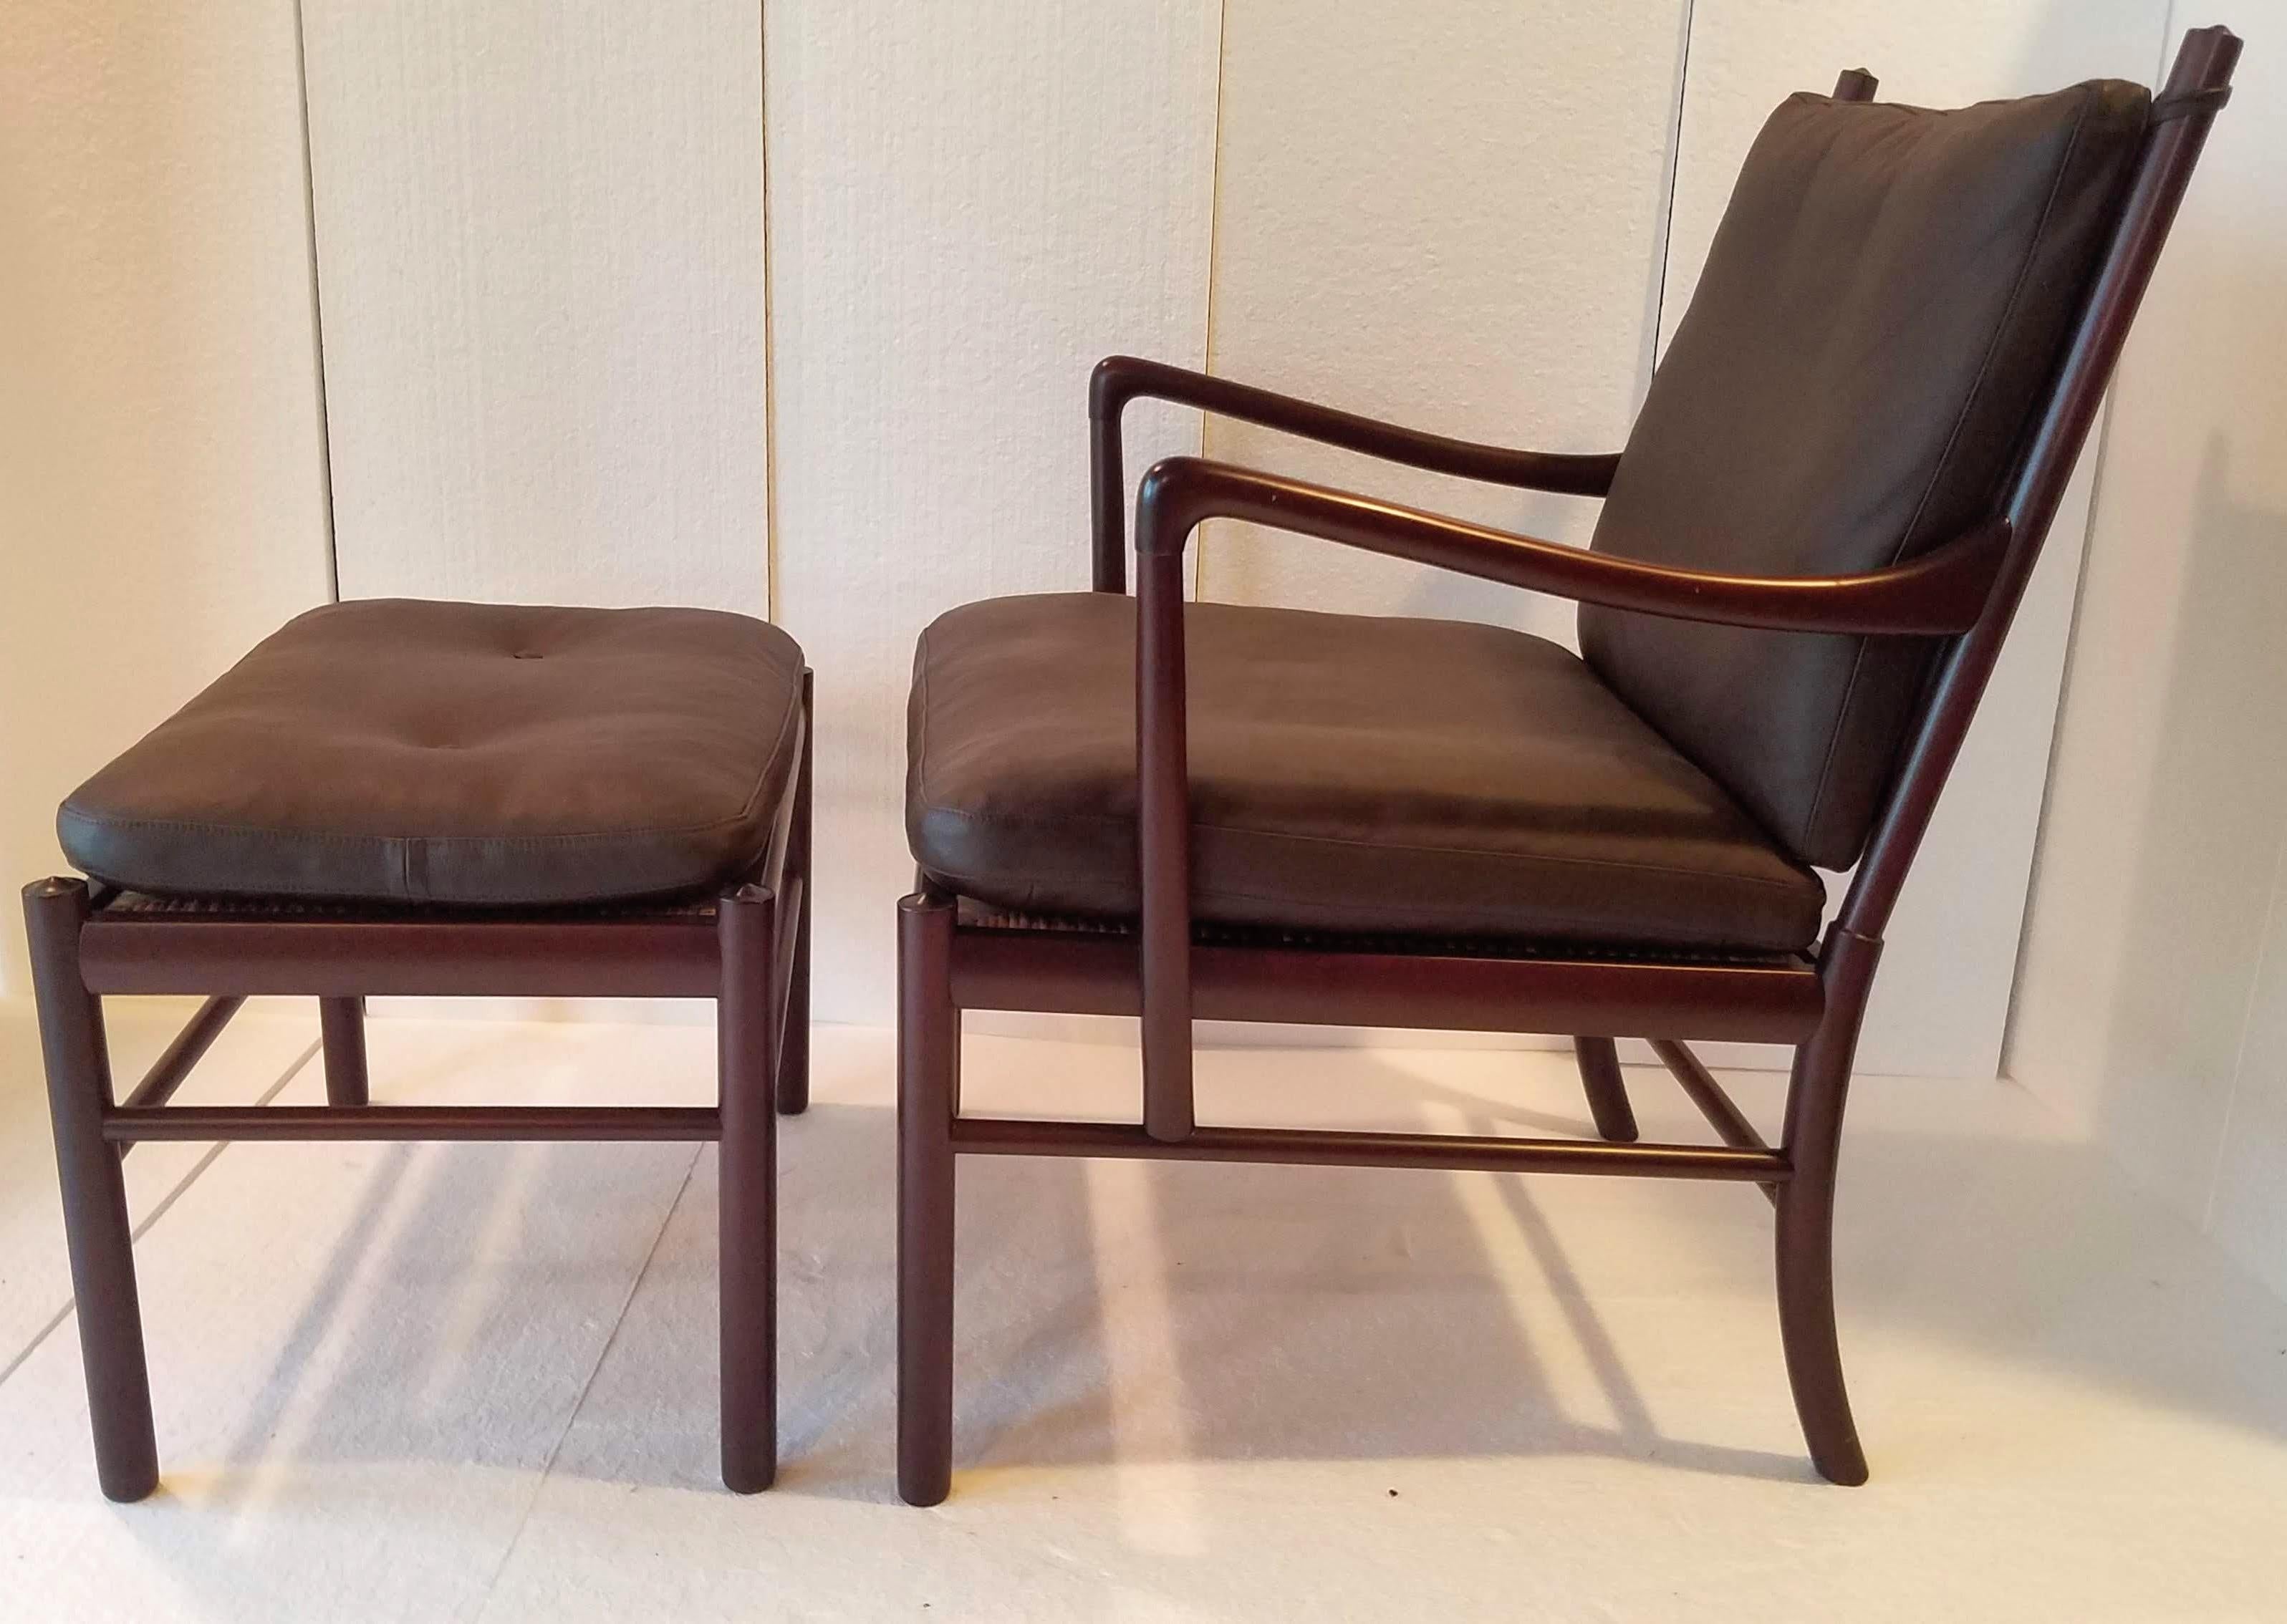 Ole Wanscher’s classic Danish modern rosewood framed lounge chair and matching ottoman from the 1960s. 
This elegantly designed armchair and ottoman by Ole Wanscher and produced by Poul Jeppesen Møbelfabrik in Denmark is a classic of the 1960s.